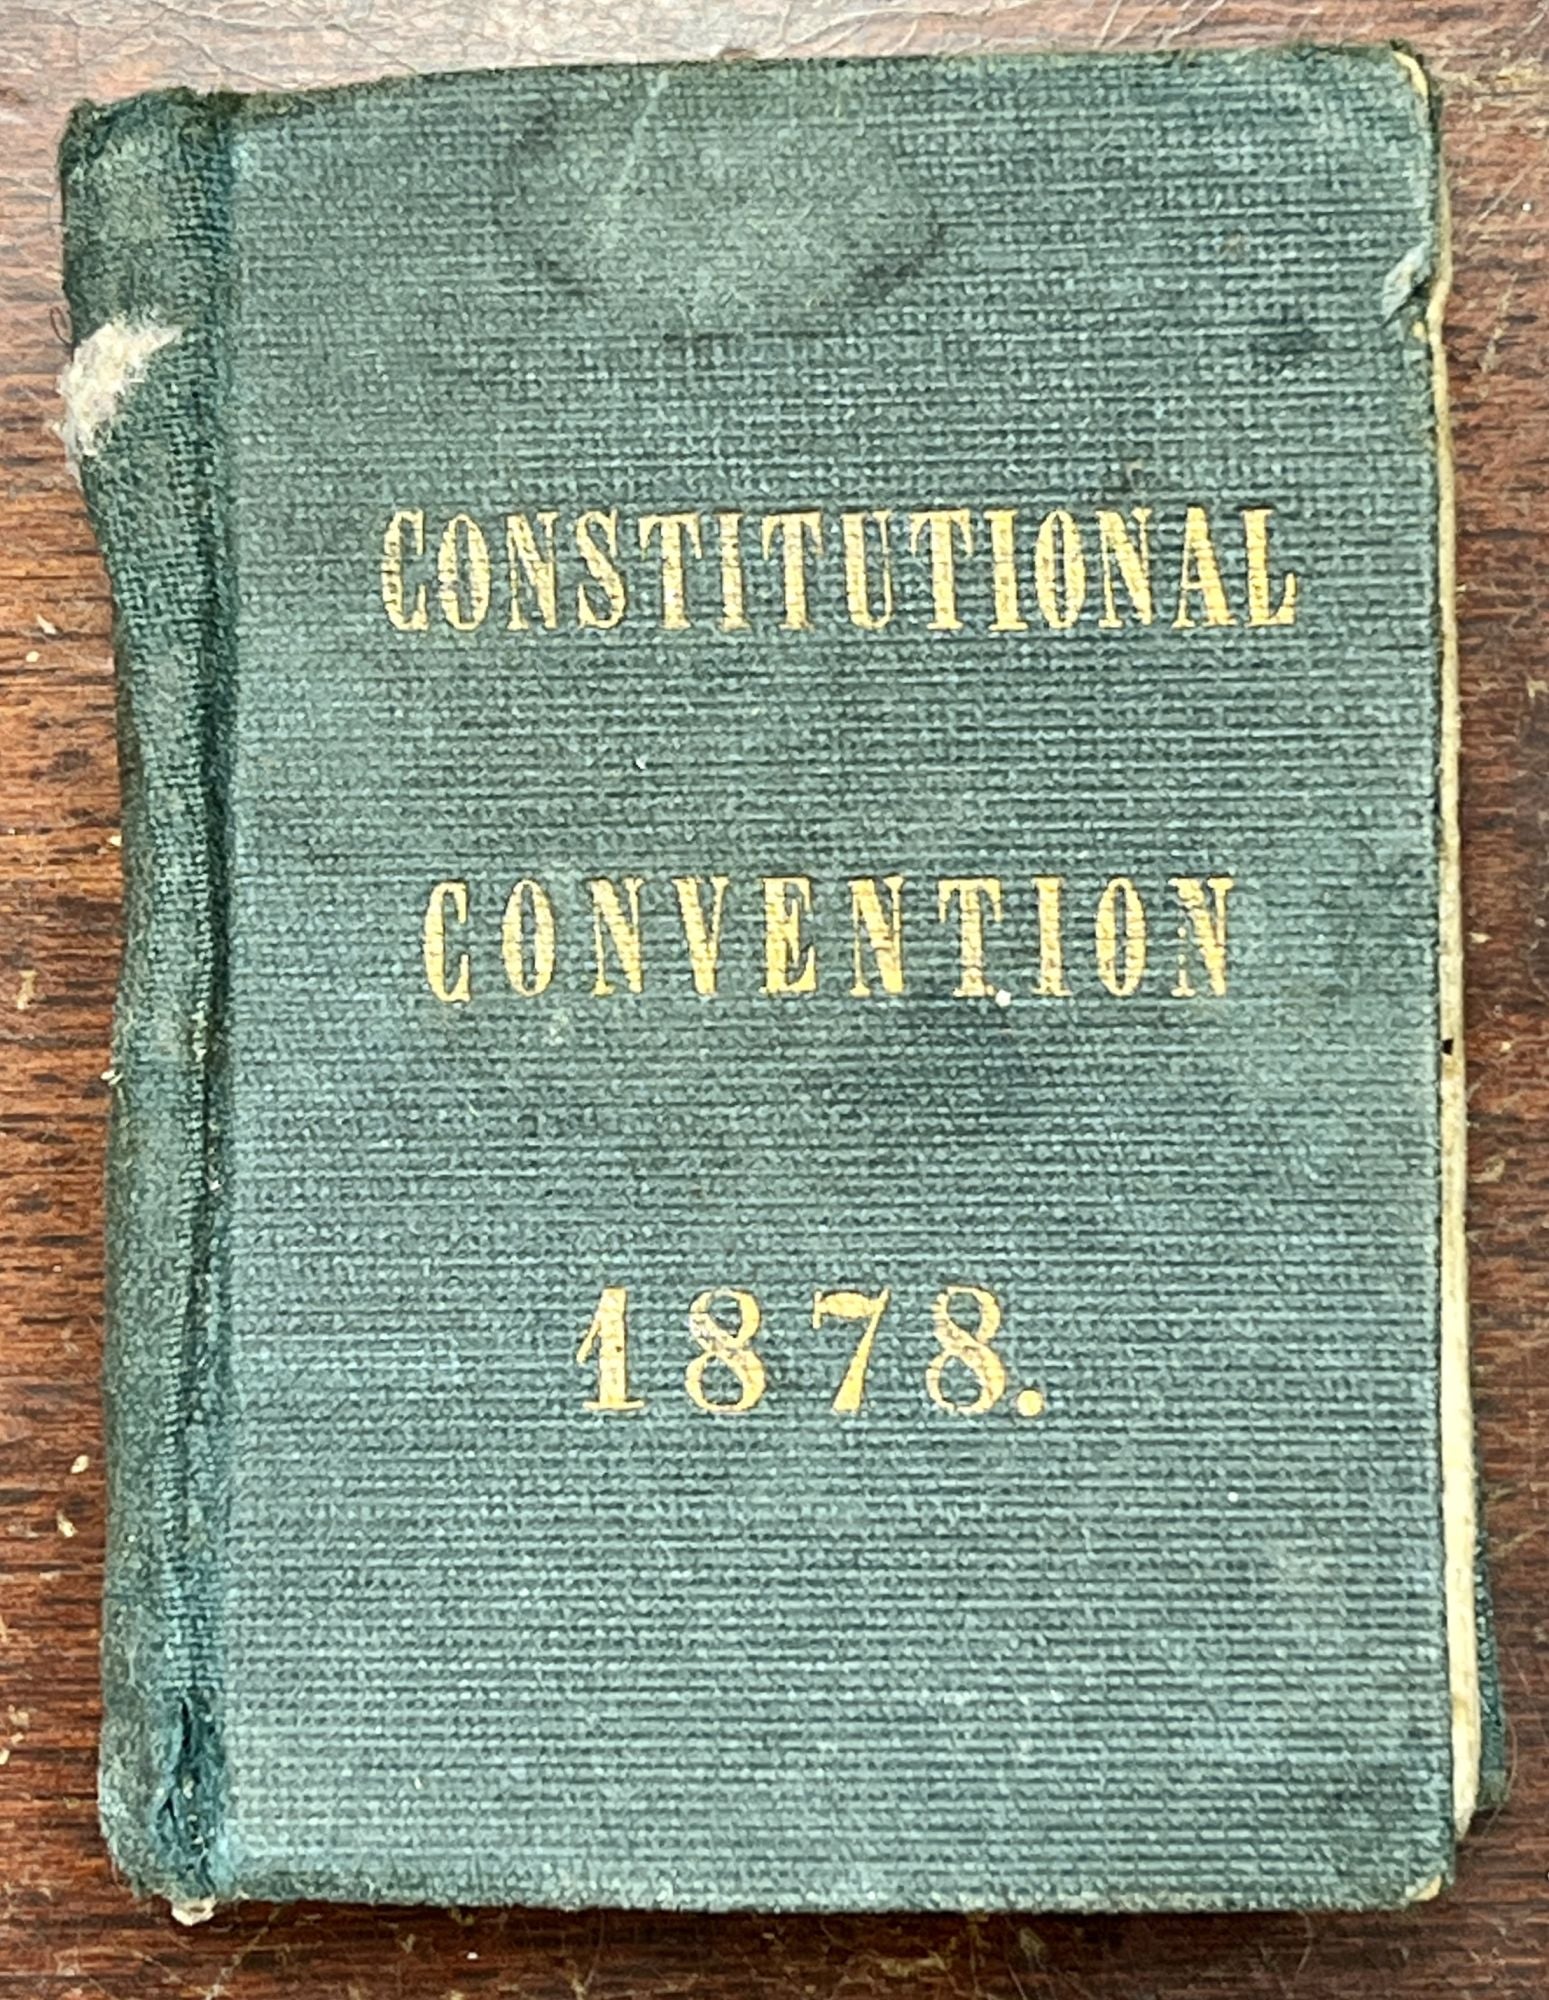 [Miniature Book]. Bynon, A. A. - The CONSTITUTIONAL CONVENTION 1878. State of California